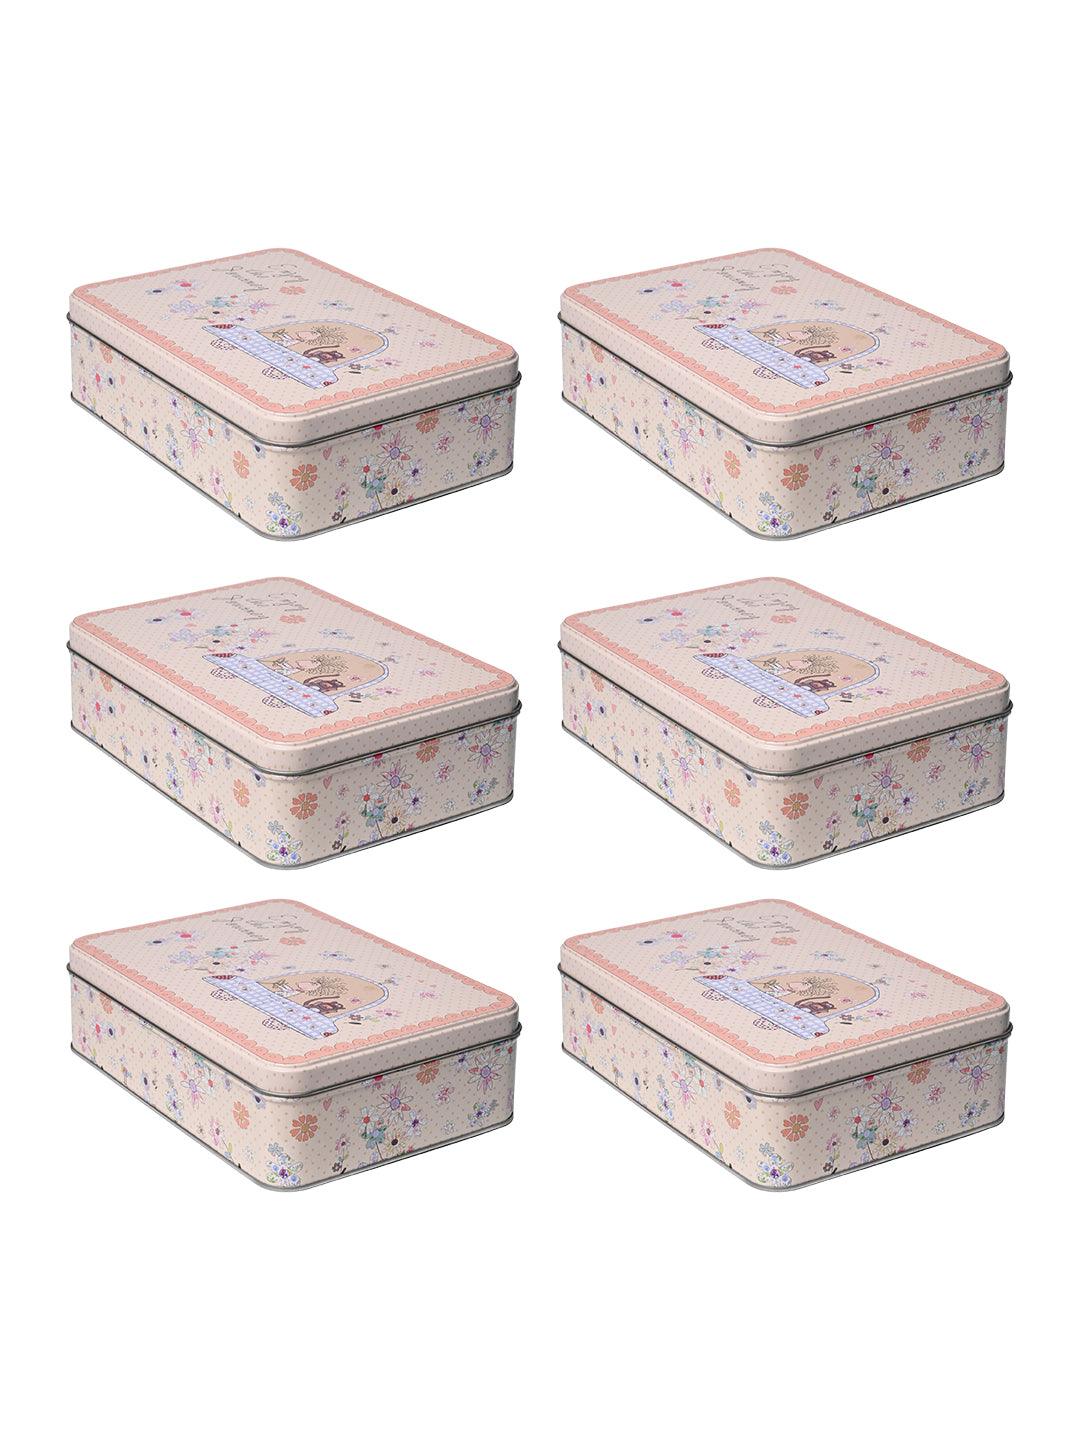 Floral Tin Storage Box Container - Set Of 6, Multicolor - MARKET99